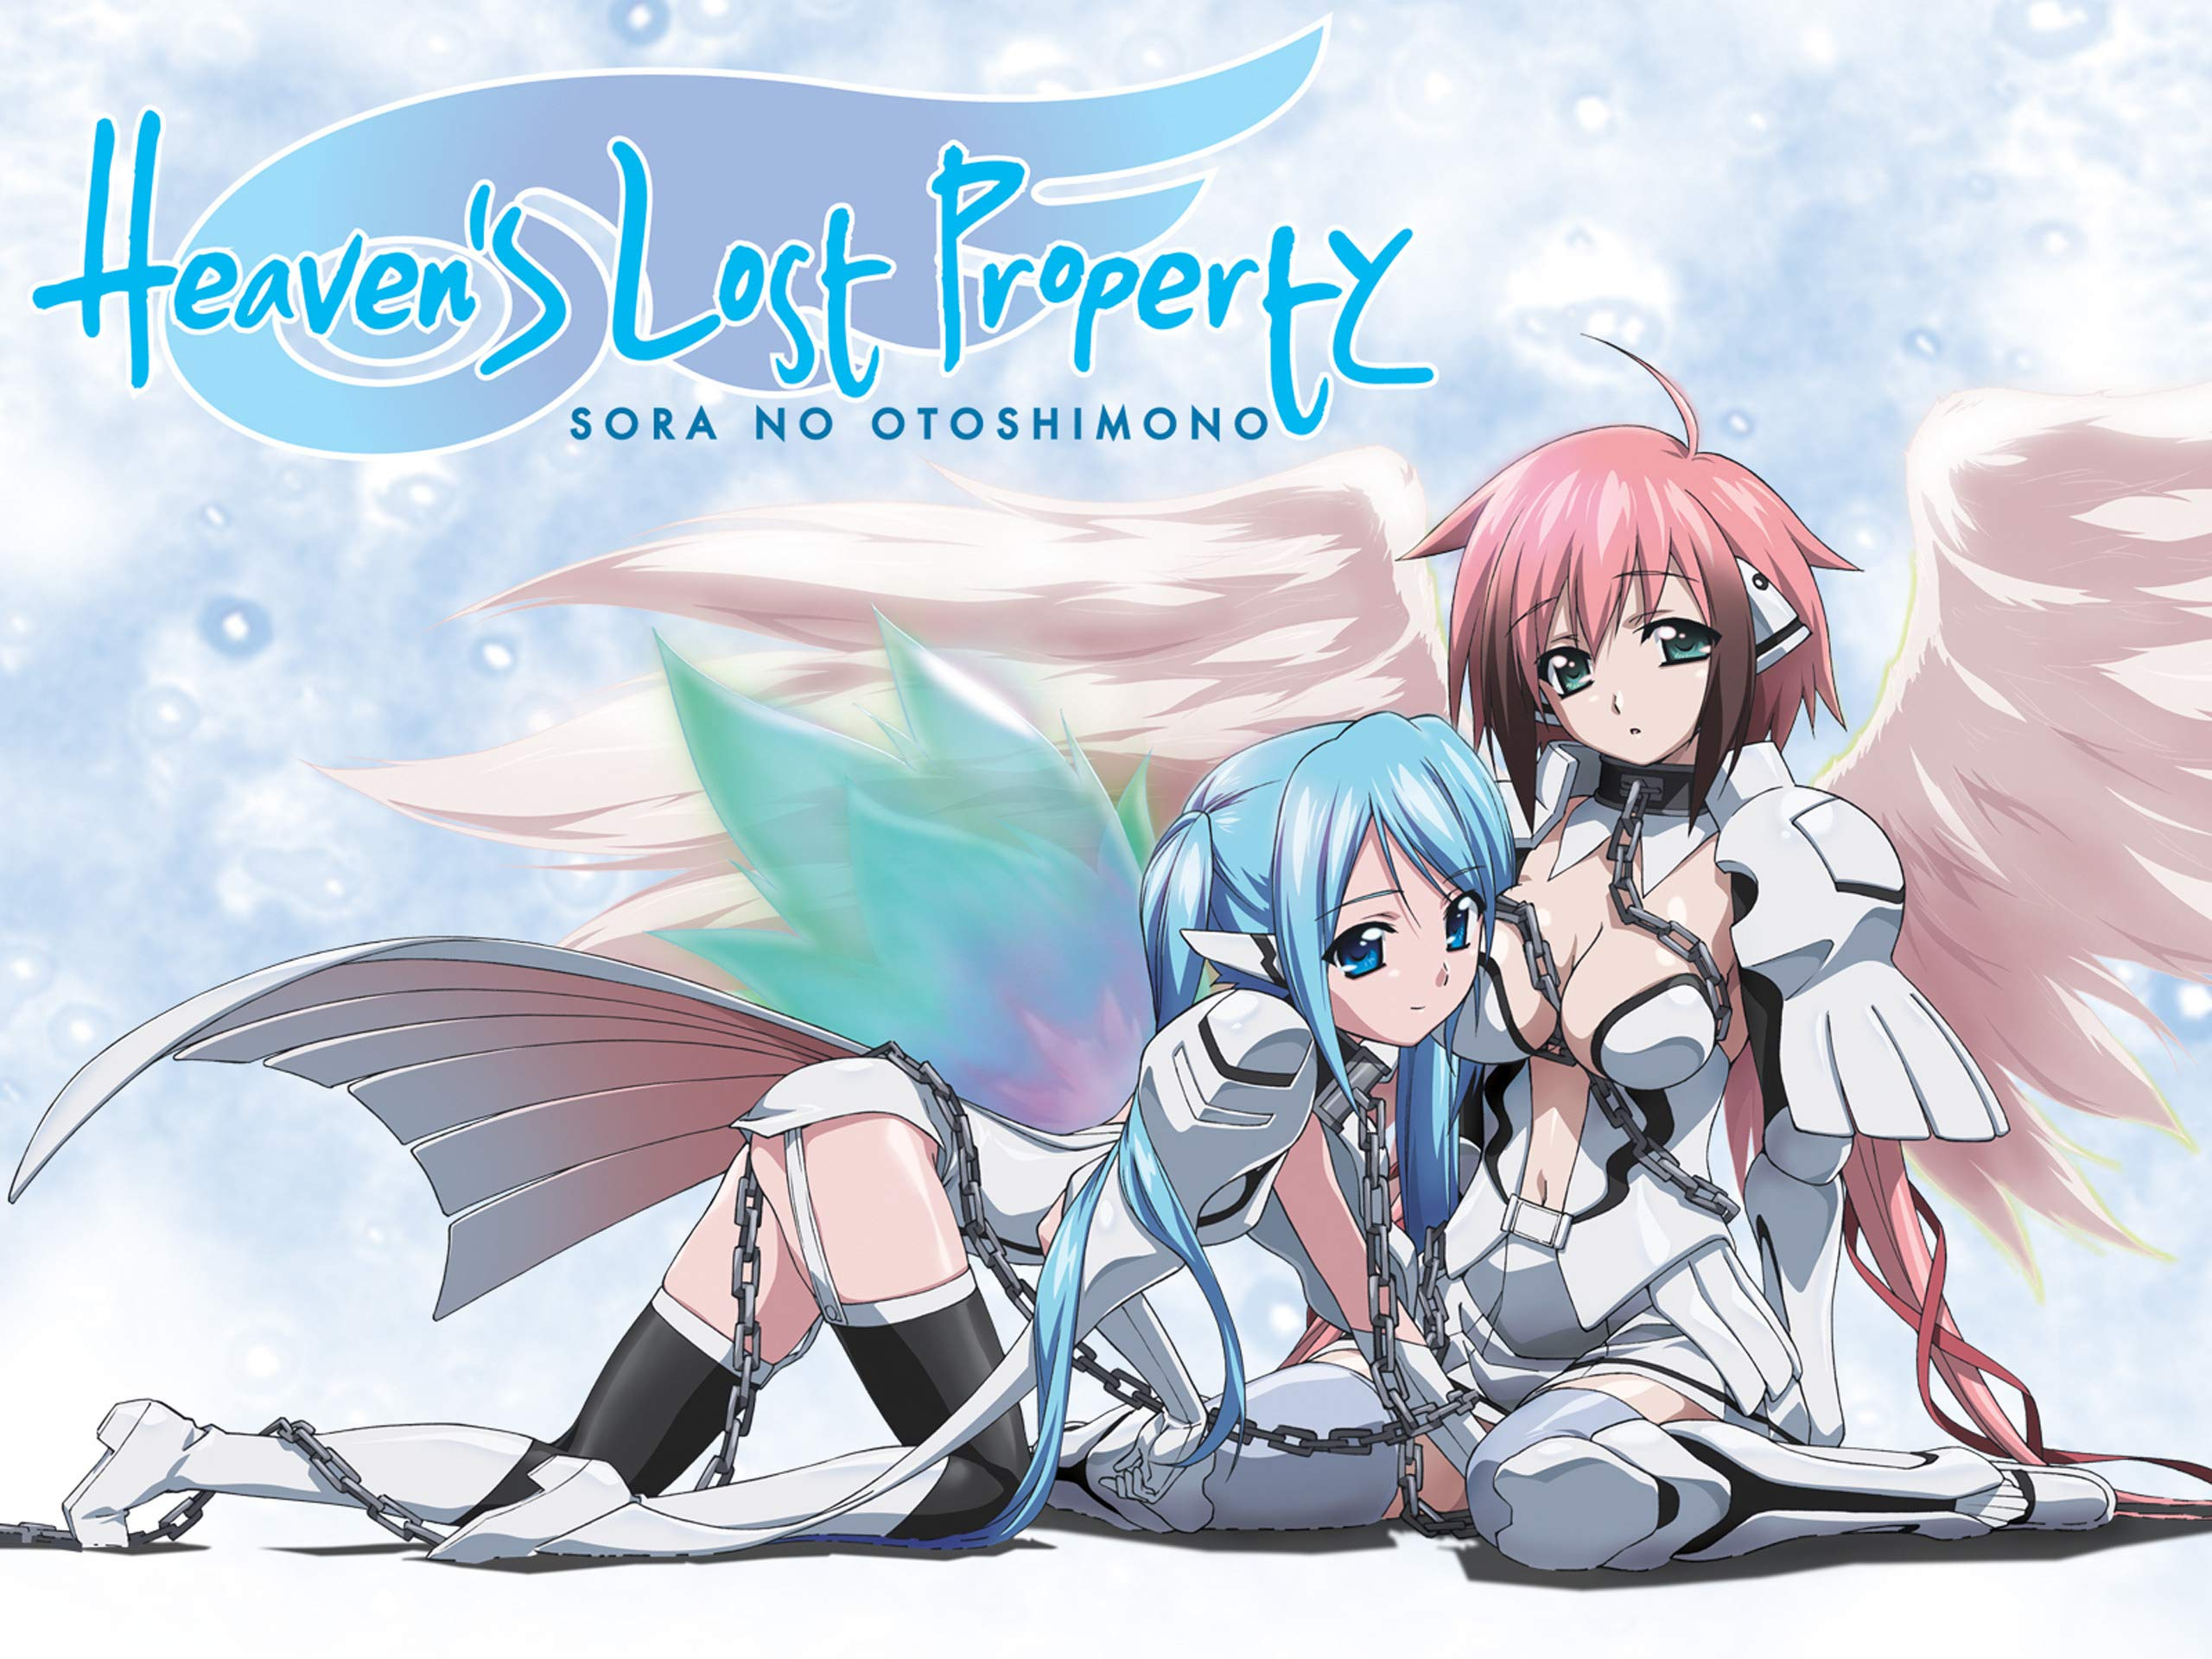 Lost Property of the Sky (2009)